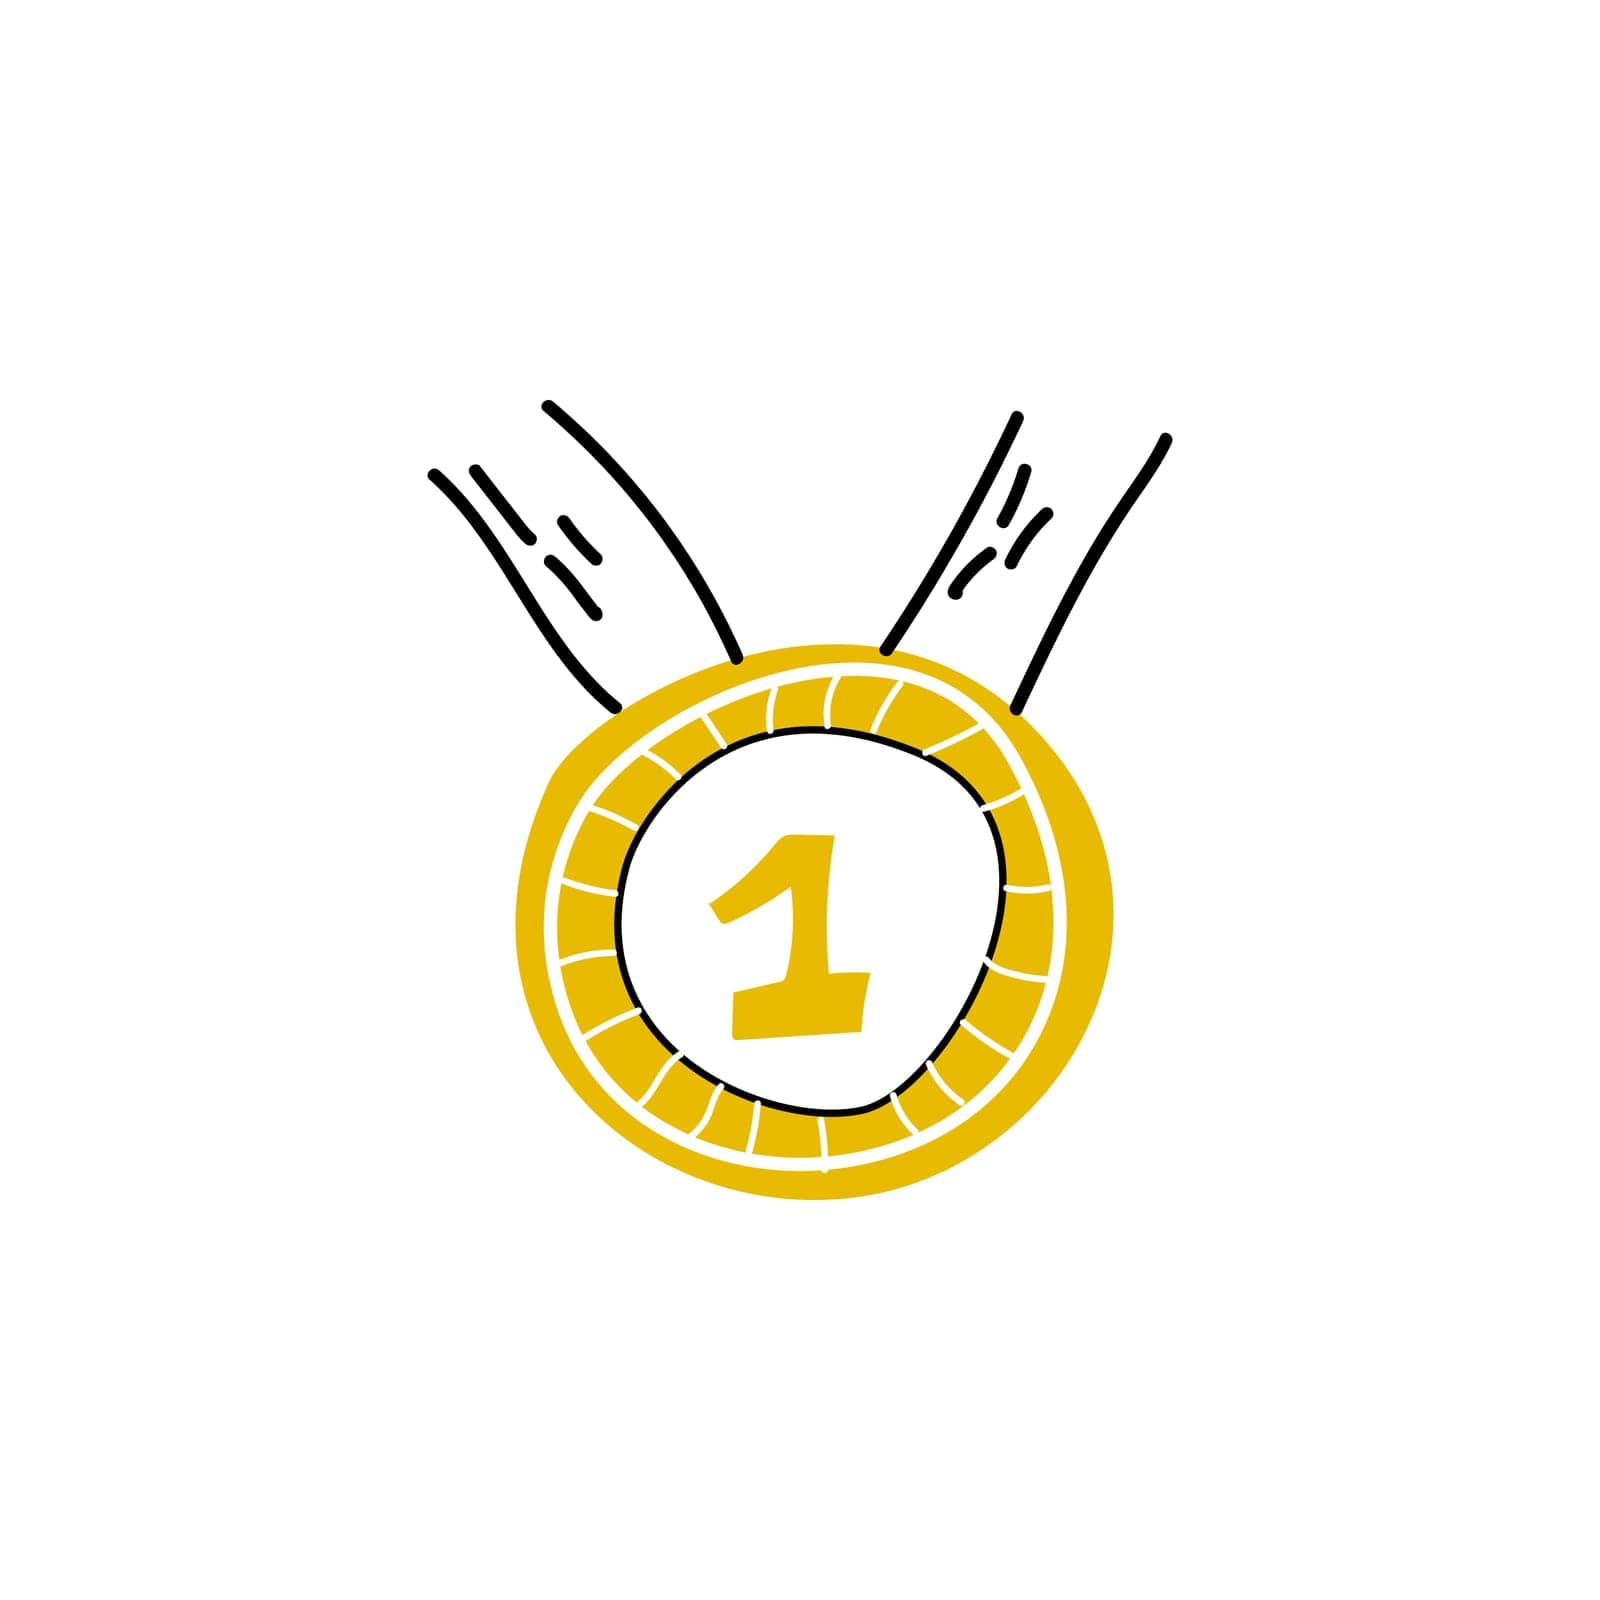 first place doodle icon of medal with ribbon. Vector illustration isolated. Hand drawn style.